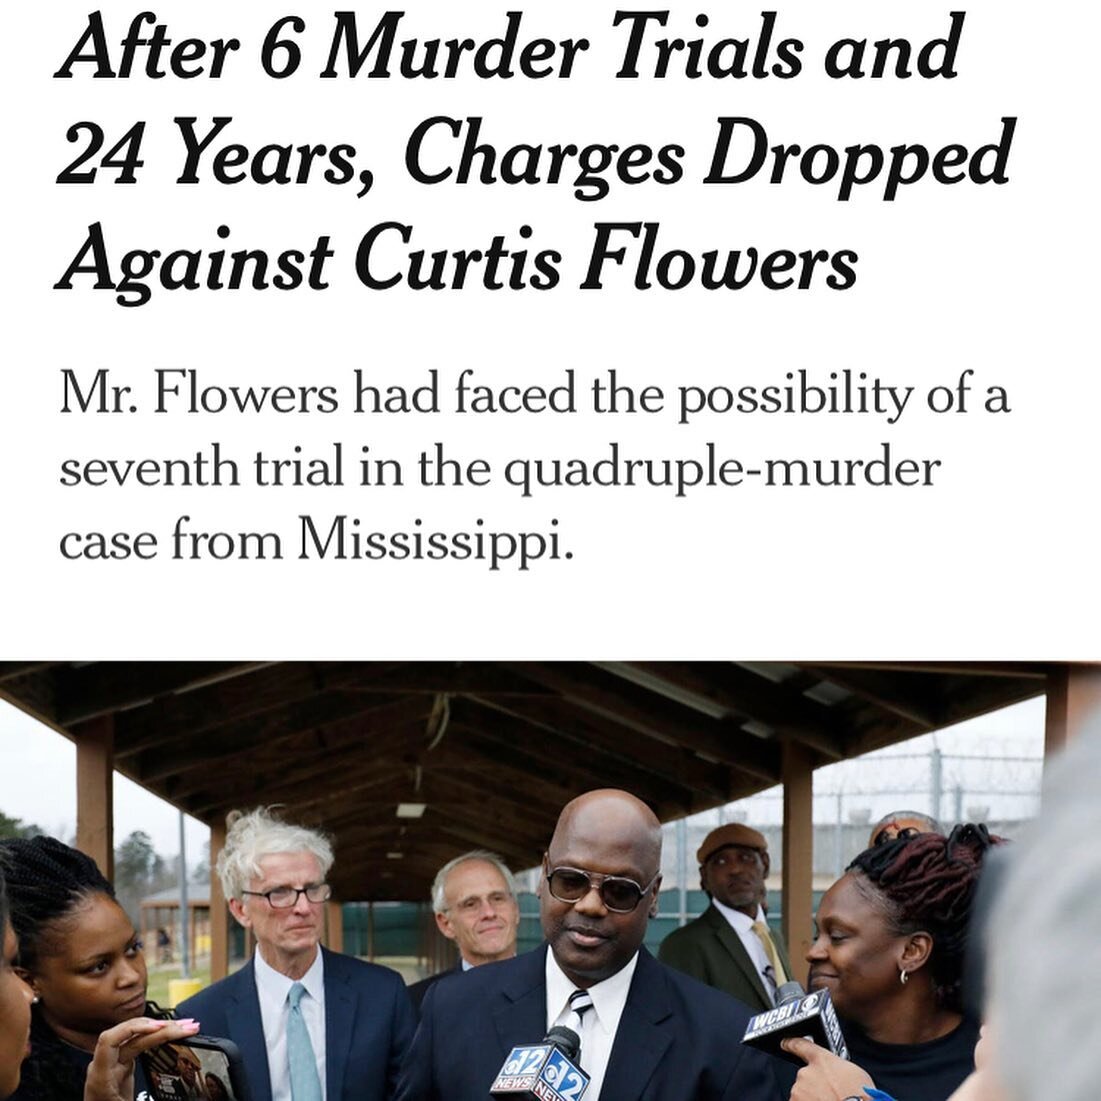 CURTIS FLOWERS&rsquo; CASE IS CLOSED!!! Link in bio. #jurydutyismyduty